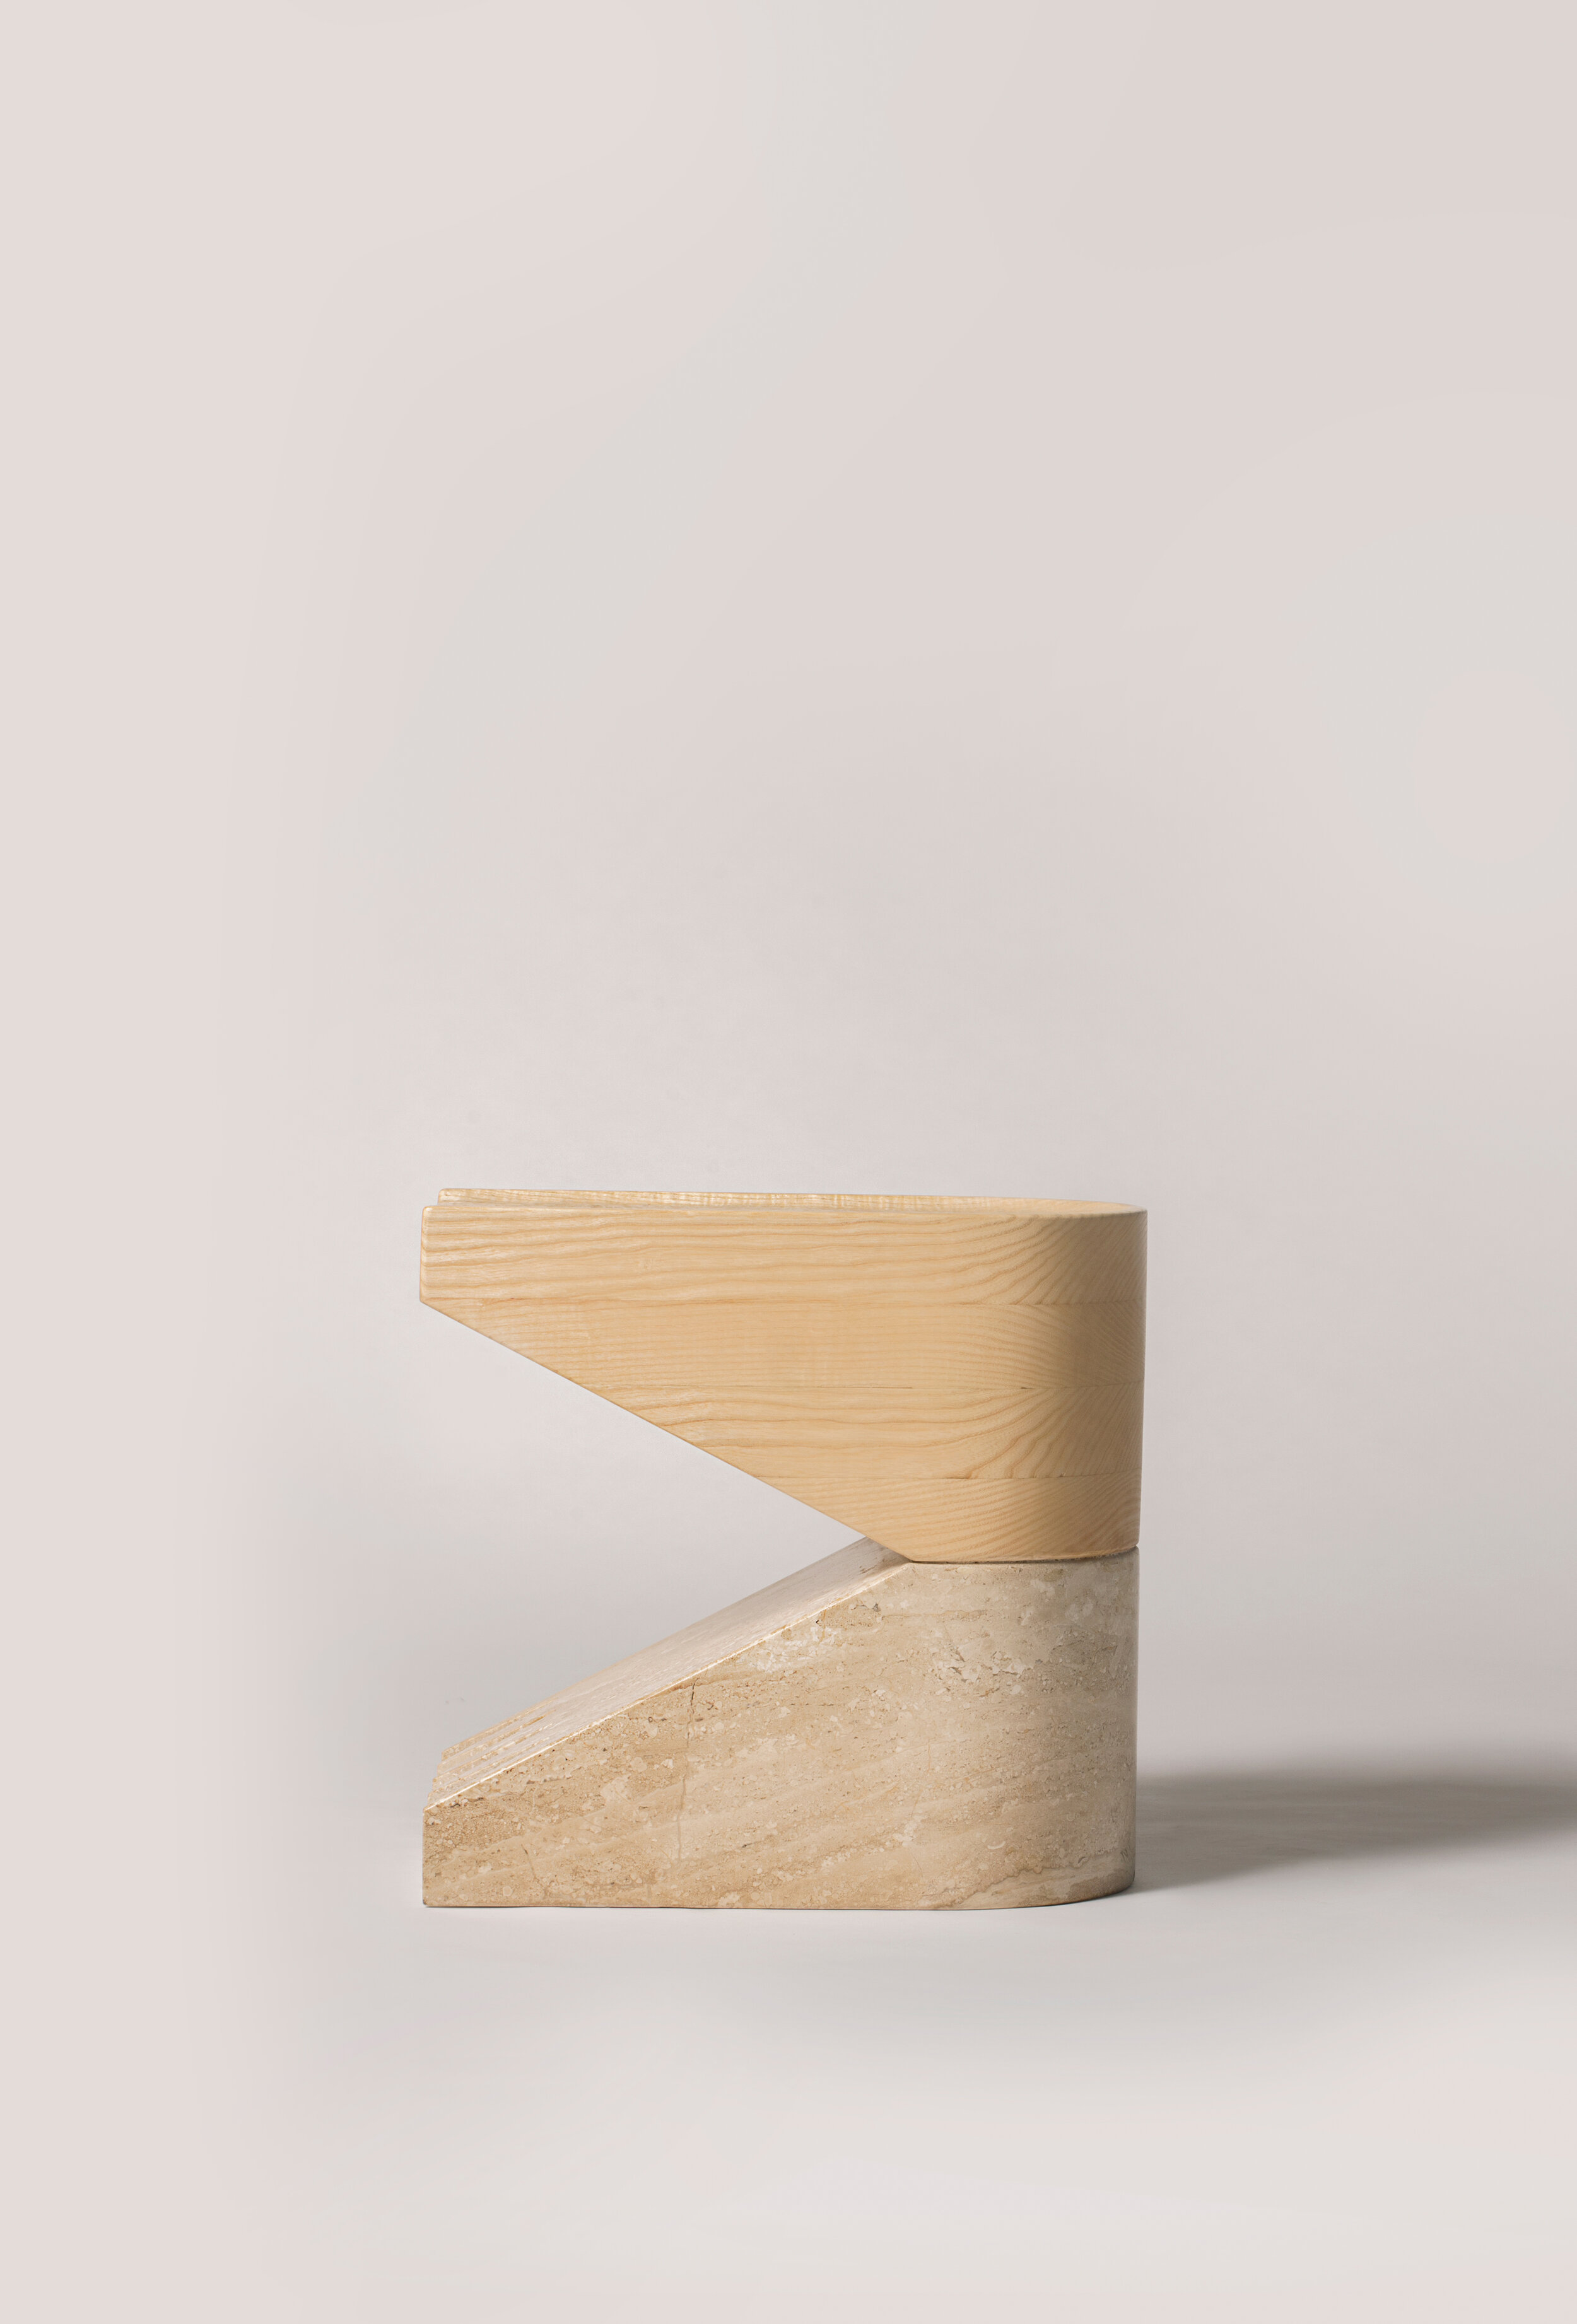 Mannu Side Table, designed by Ambroise Maggiar, made by Karmine Piras & CP Basalti_profile.jpg